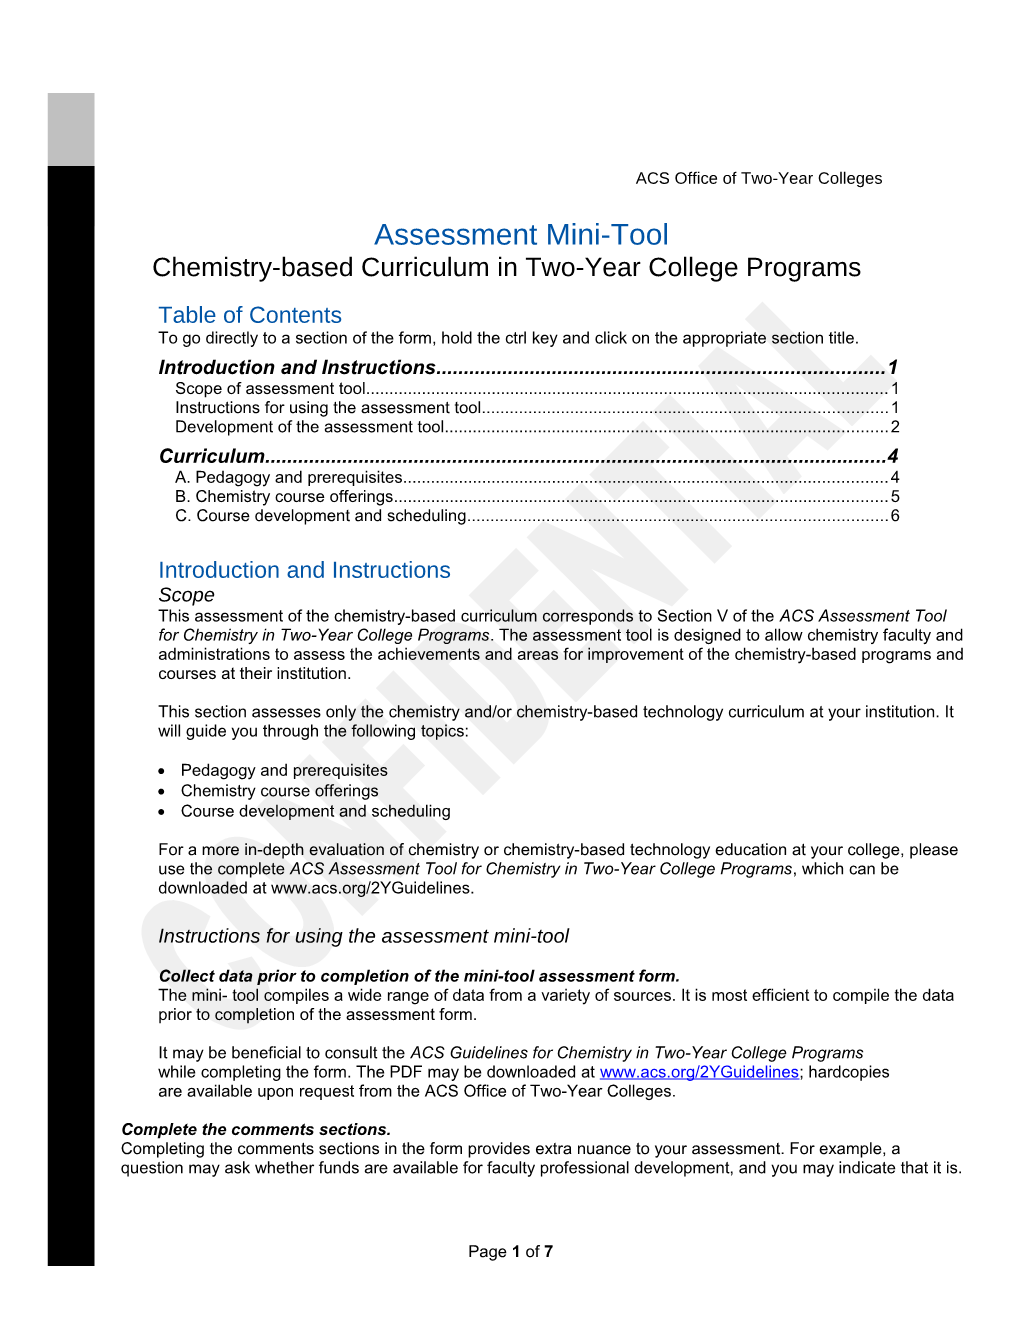 American Chemical Society Self-Study Form for Chemistry in Two-Year College Programs